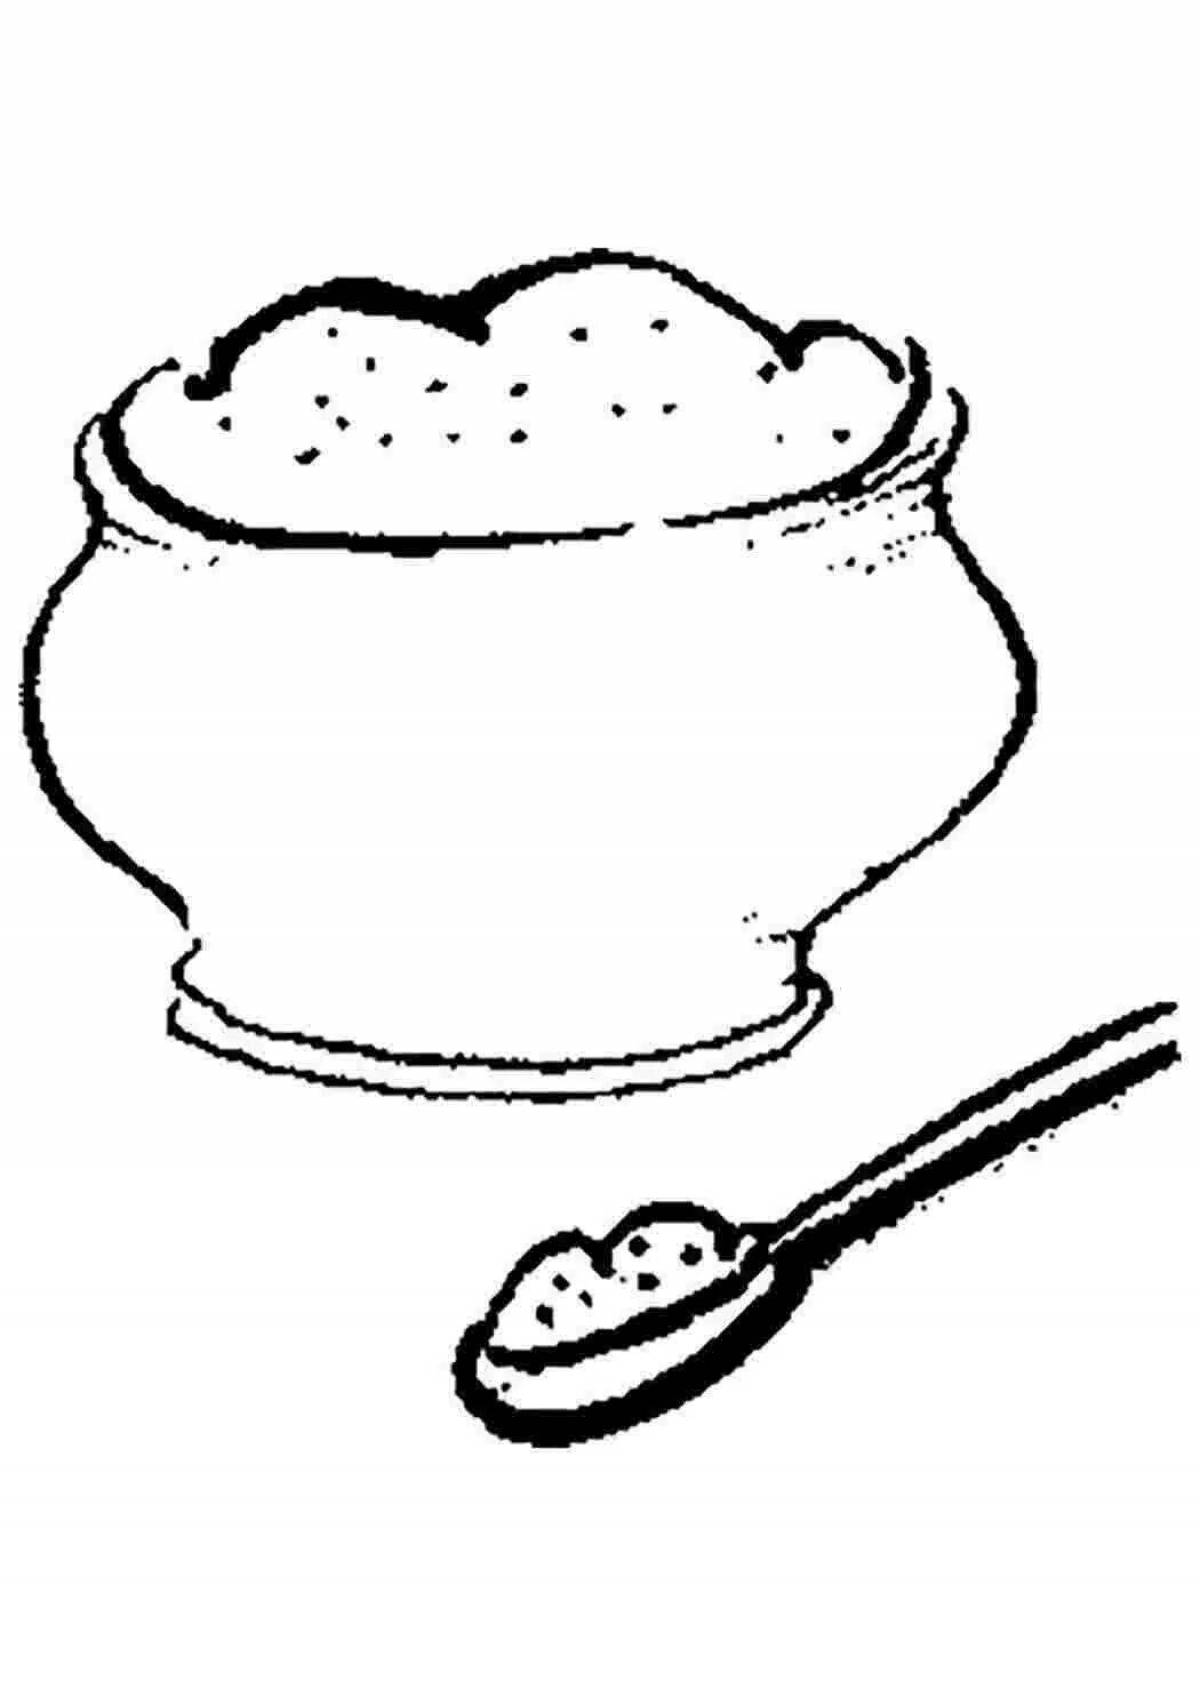 Coloring pot coloring page